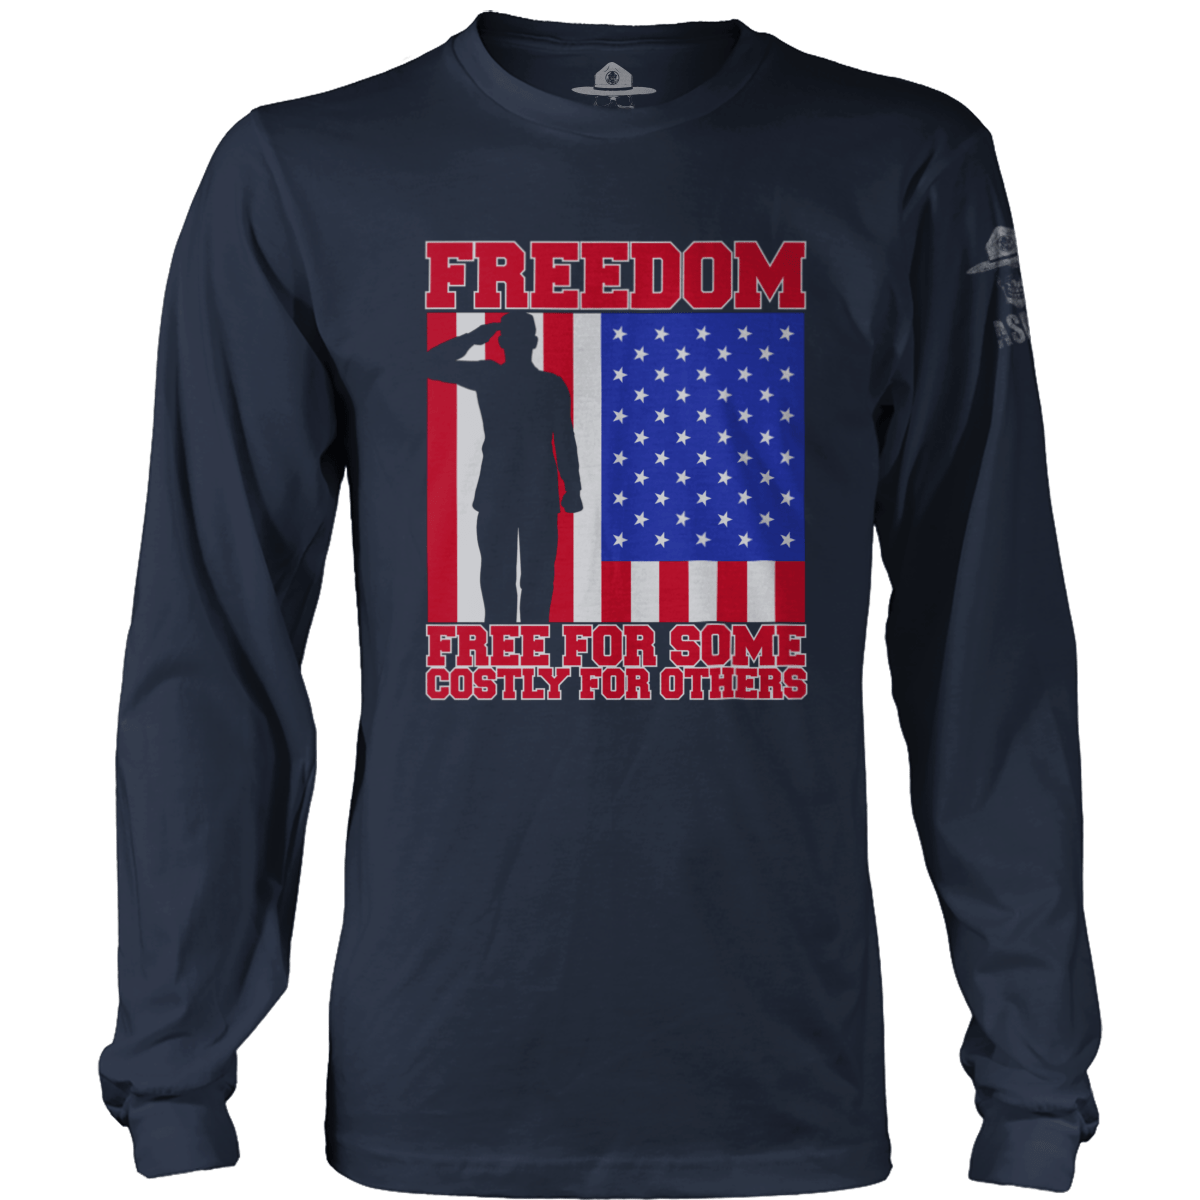 Freedom: Free For Some